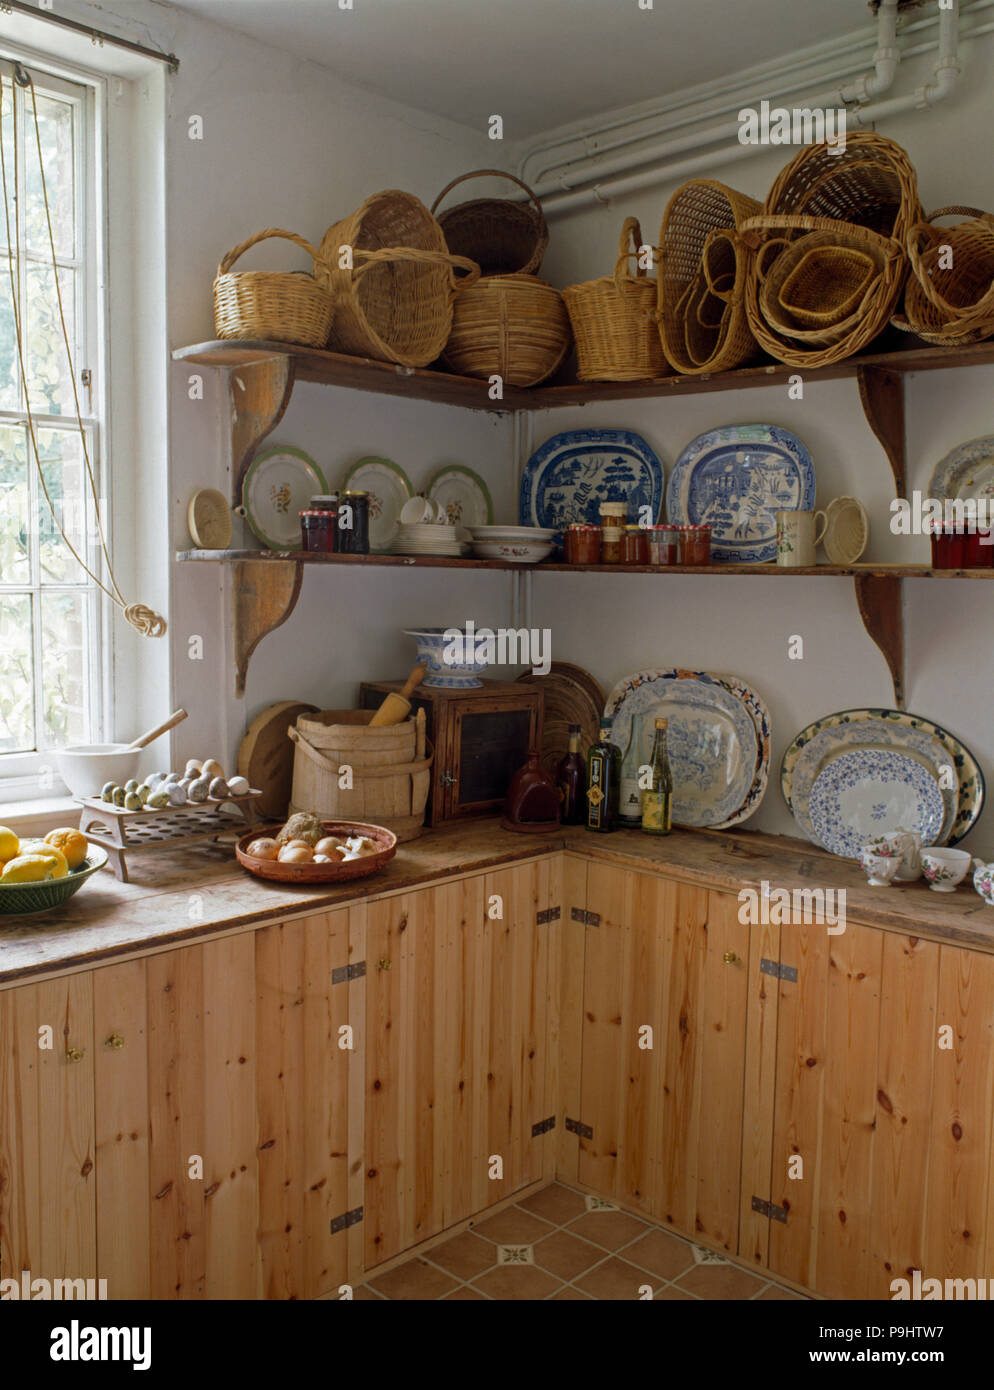 Collection of vintage baskets and crockery on simple shelves in nineties kitchen with pine cupboards Stock Photo